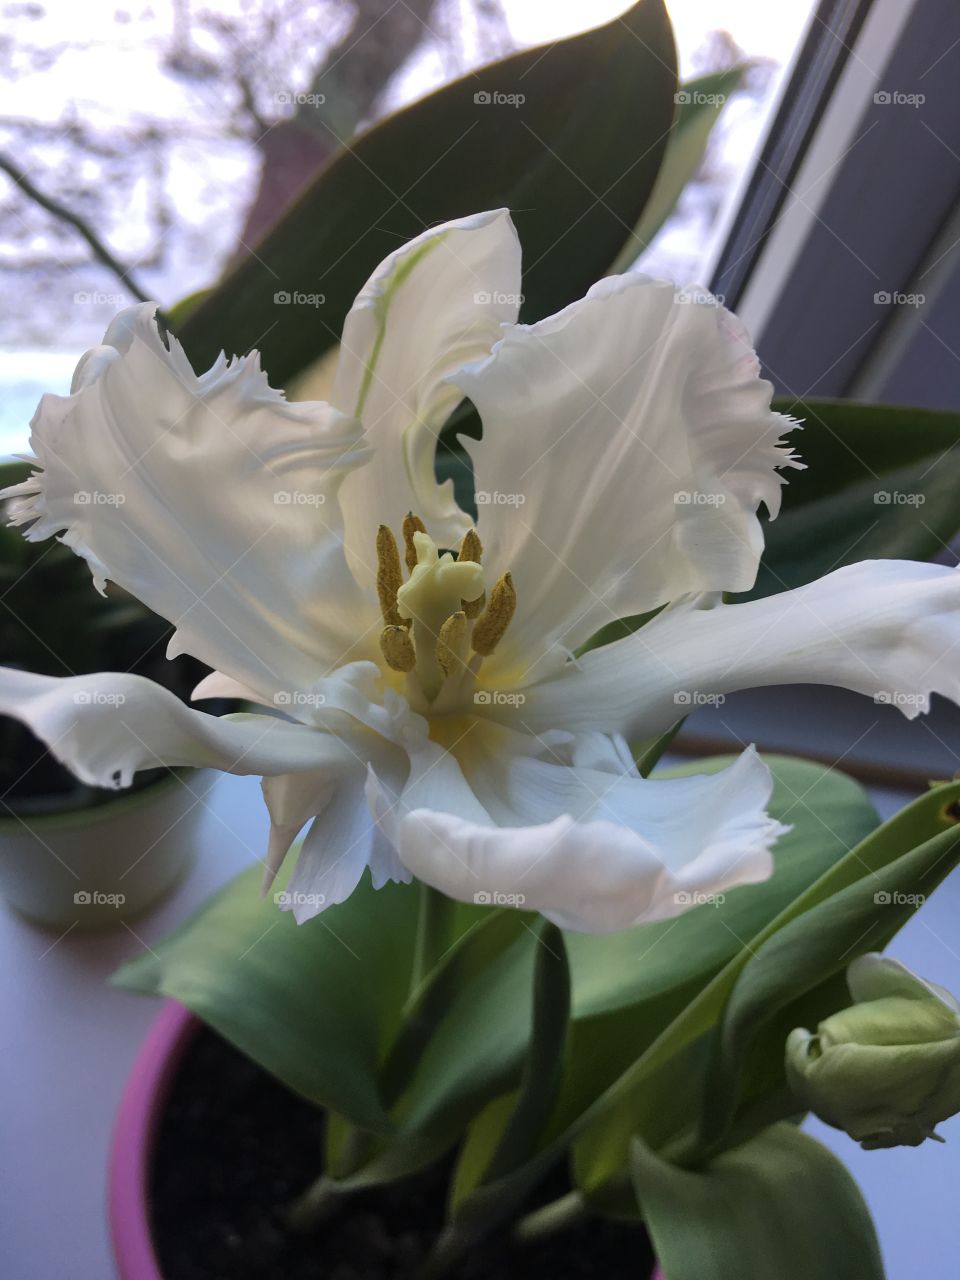 The white tulip is blooming. The white tulip petals and green leaves. White tulip close up. Spring flowers. 